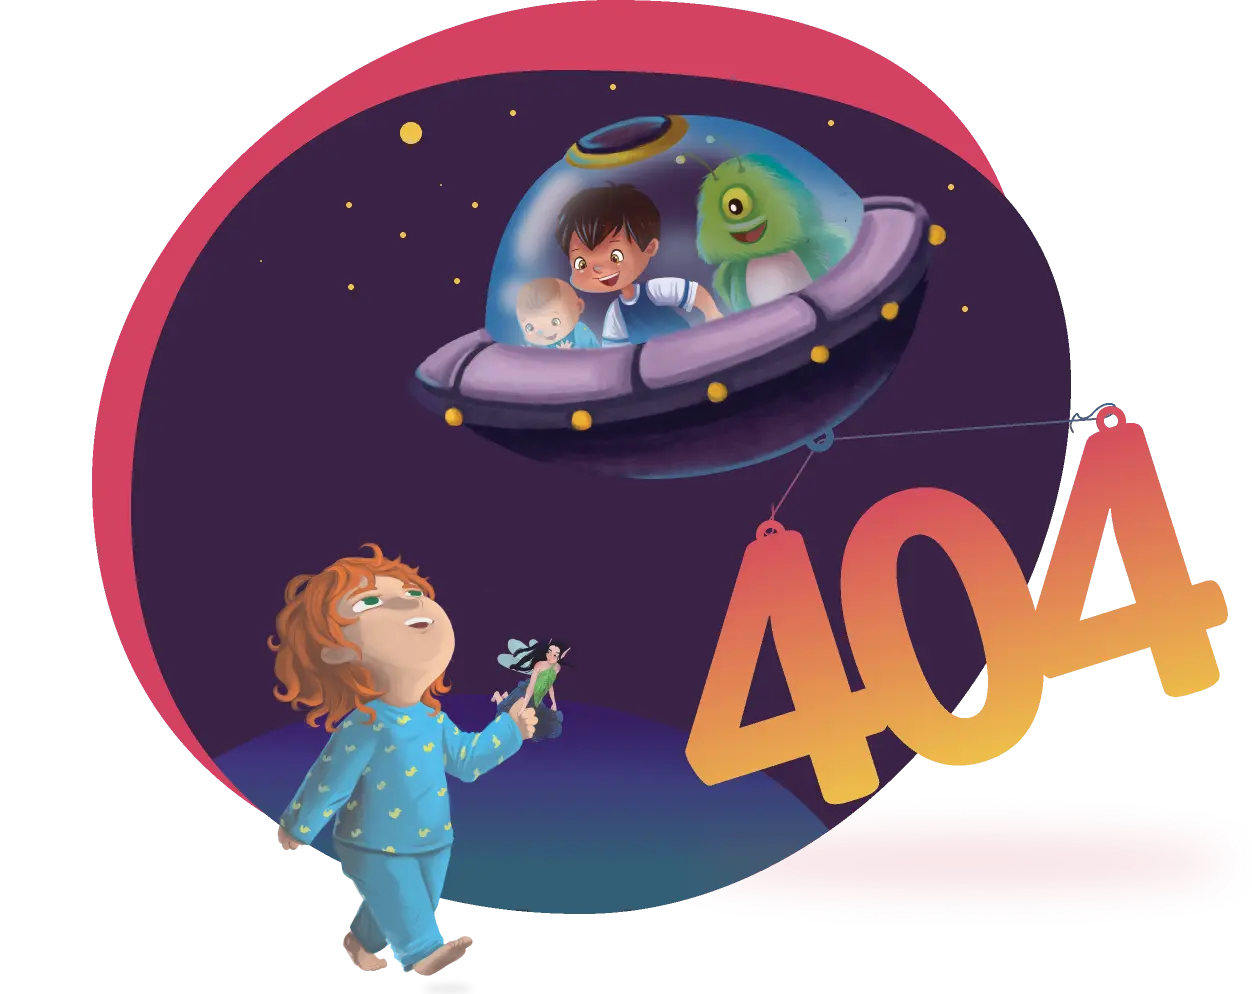 Aliens carrying a 404 sign